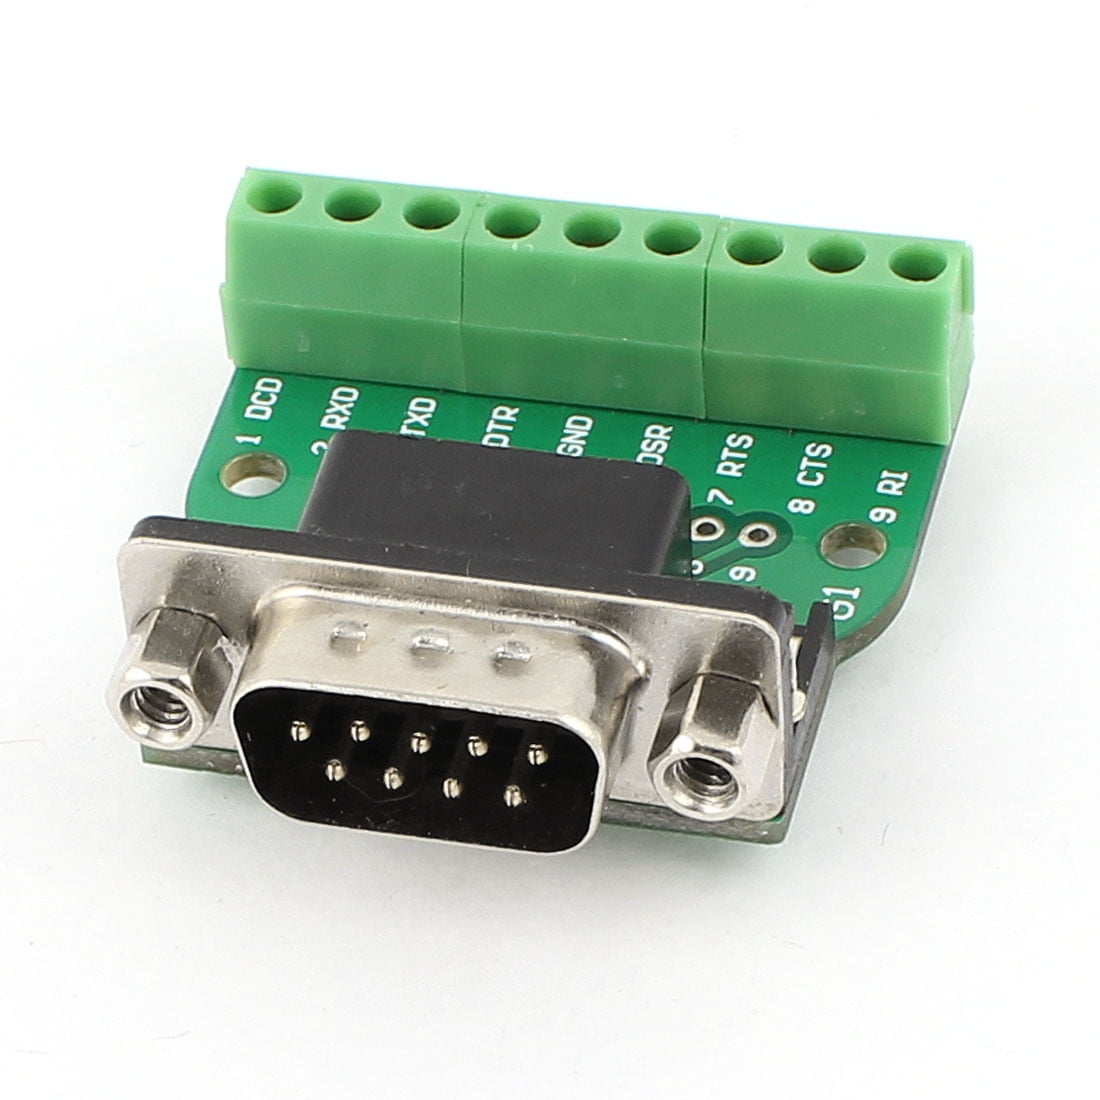 DB9 RS232 Serial D SUB Male Connector to 9 Position Terminal Breakout